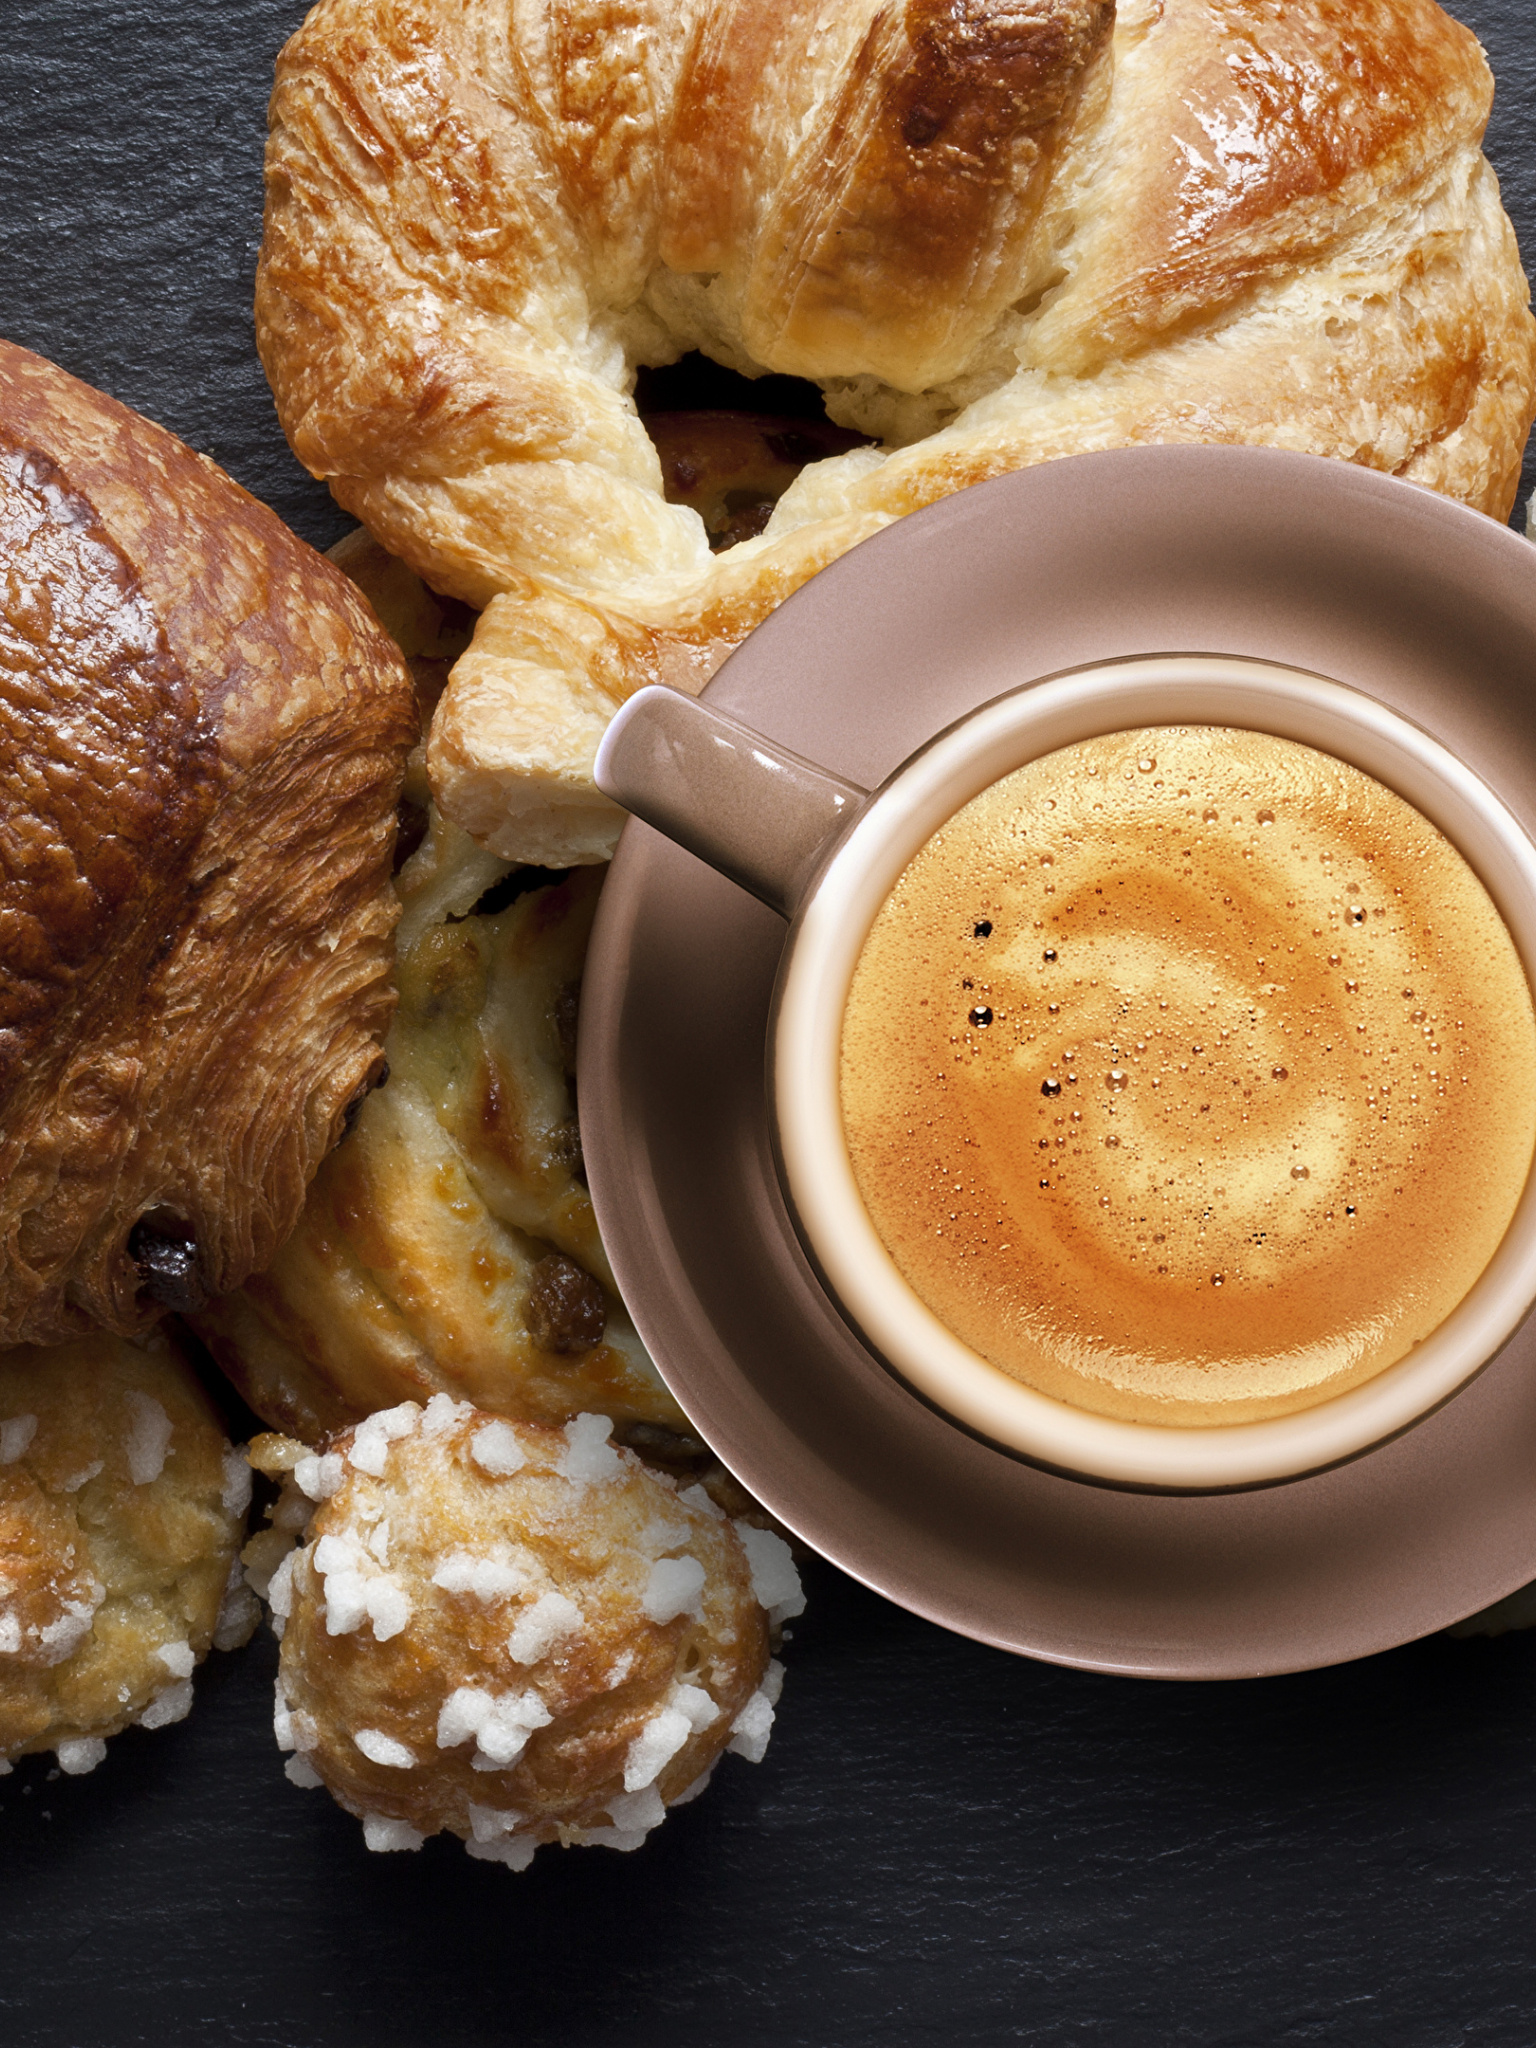 Croissant: The inside is light and airy, while the exterior is golden and crispy. 1540x2050 HD Wallpaper.